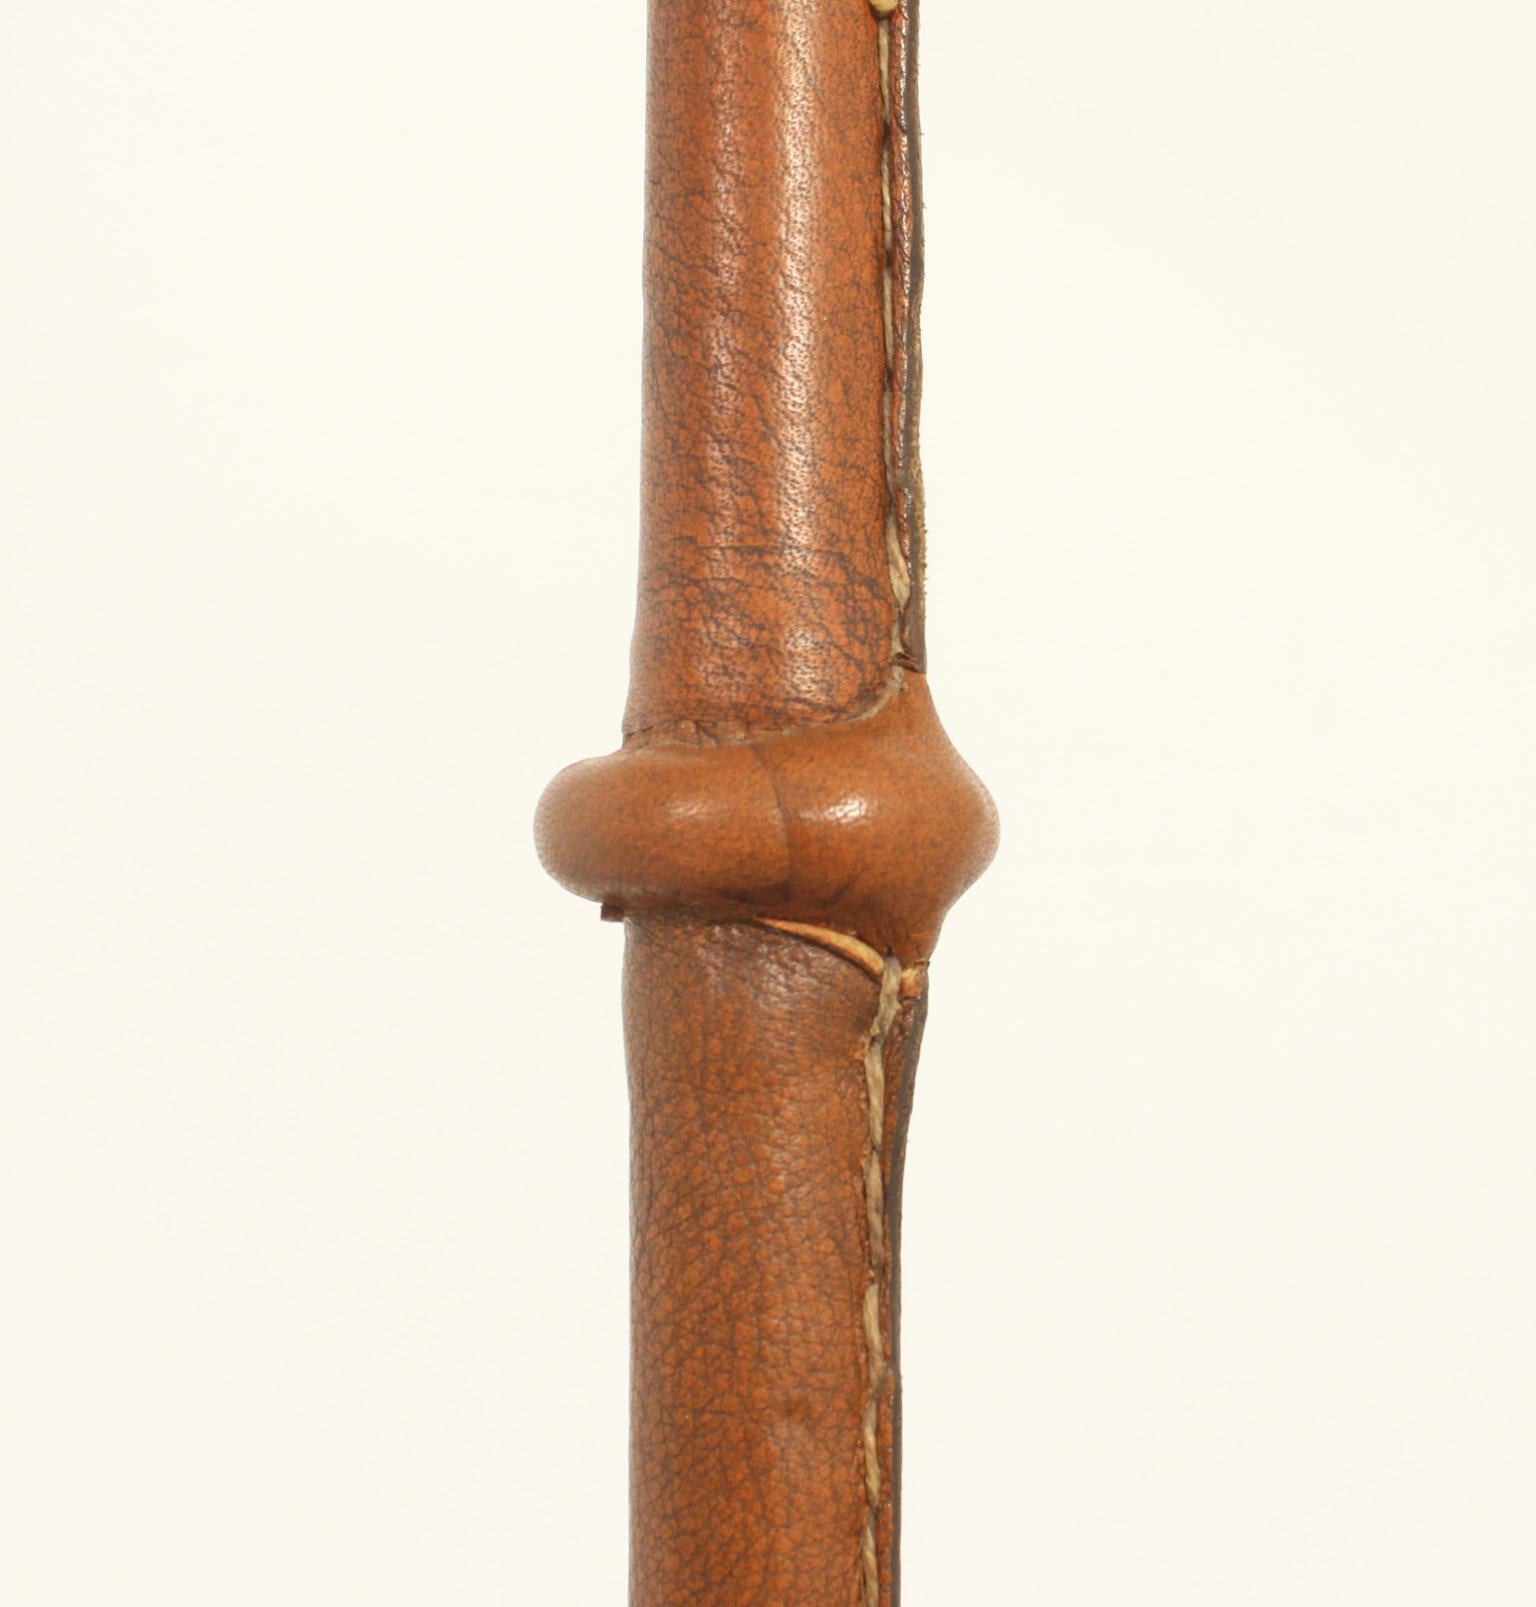 Floor Lamp by Valenti in Brown Leather, Spain, 1950's For Sale 5